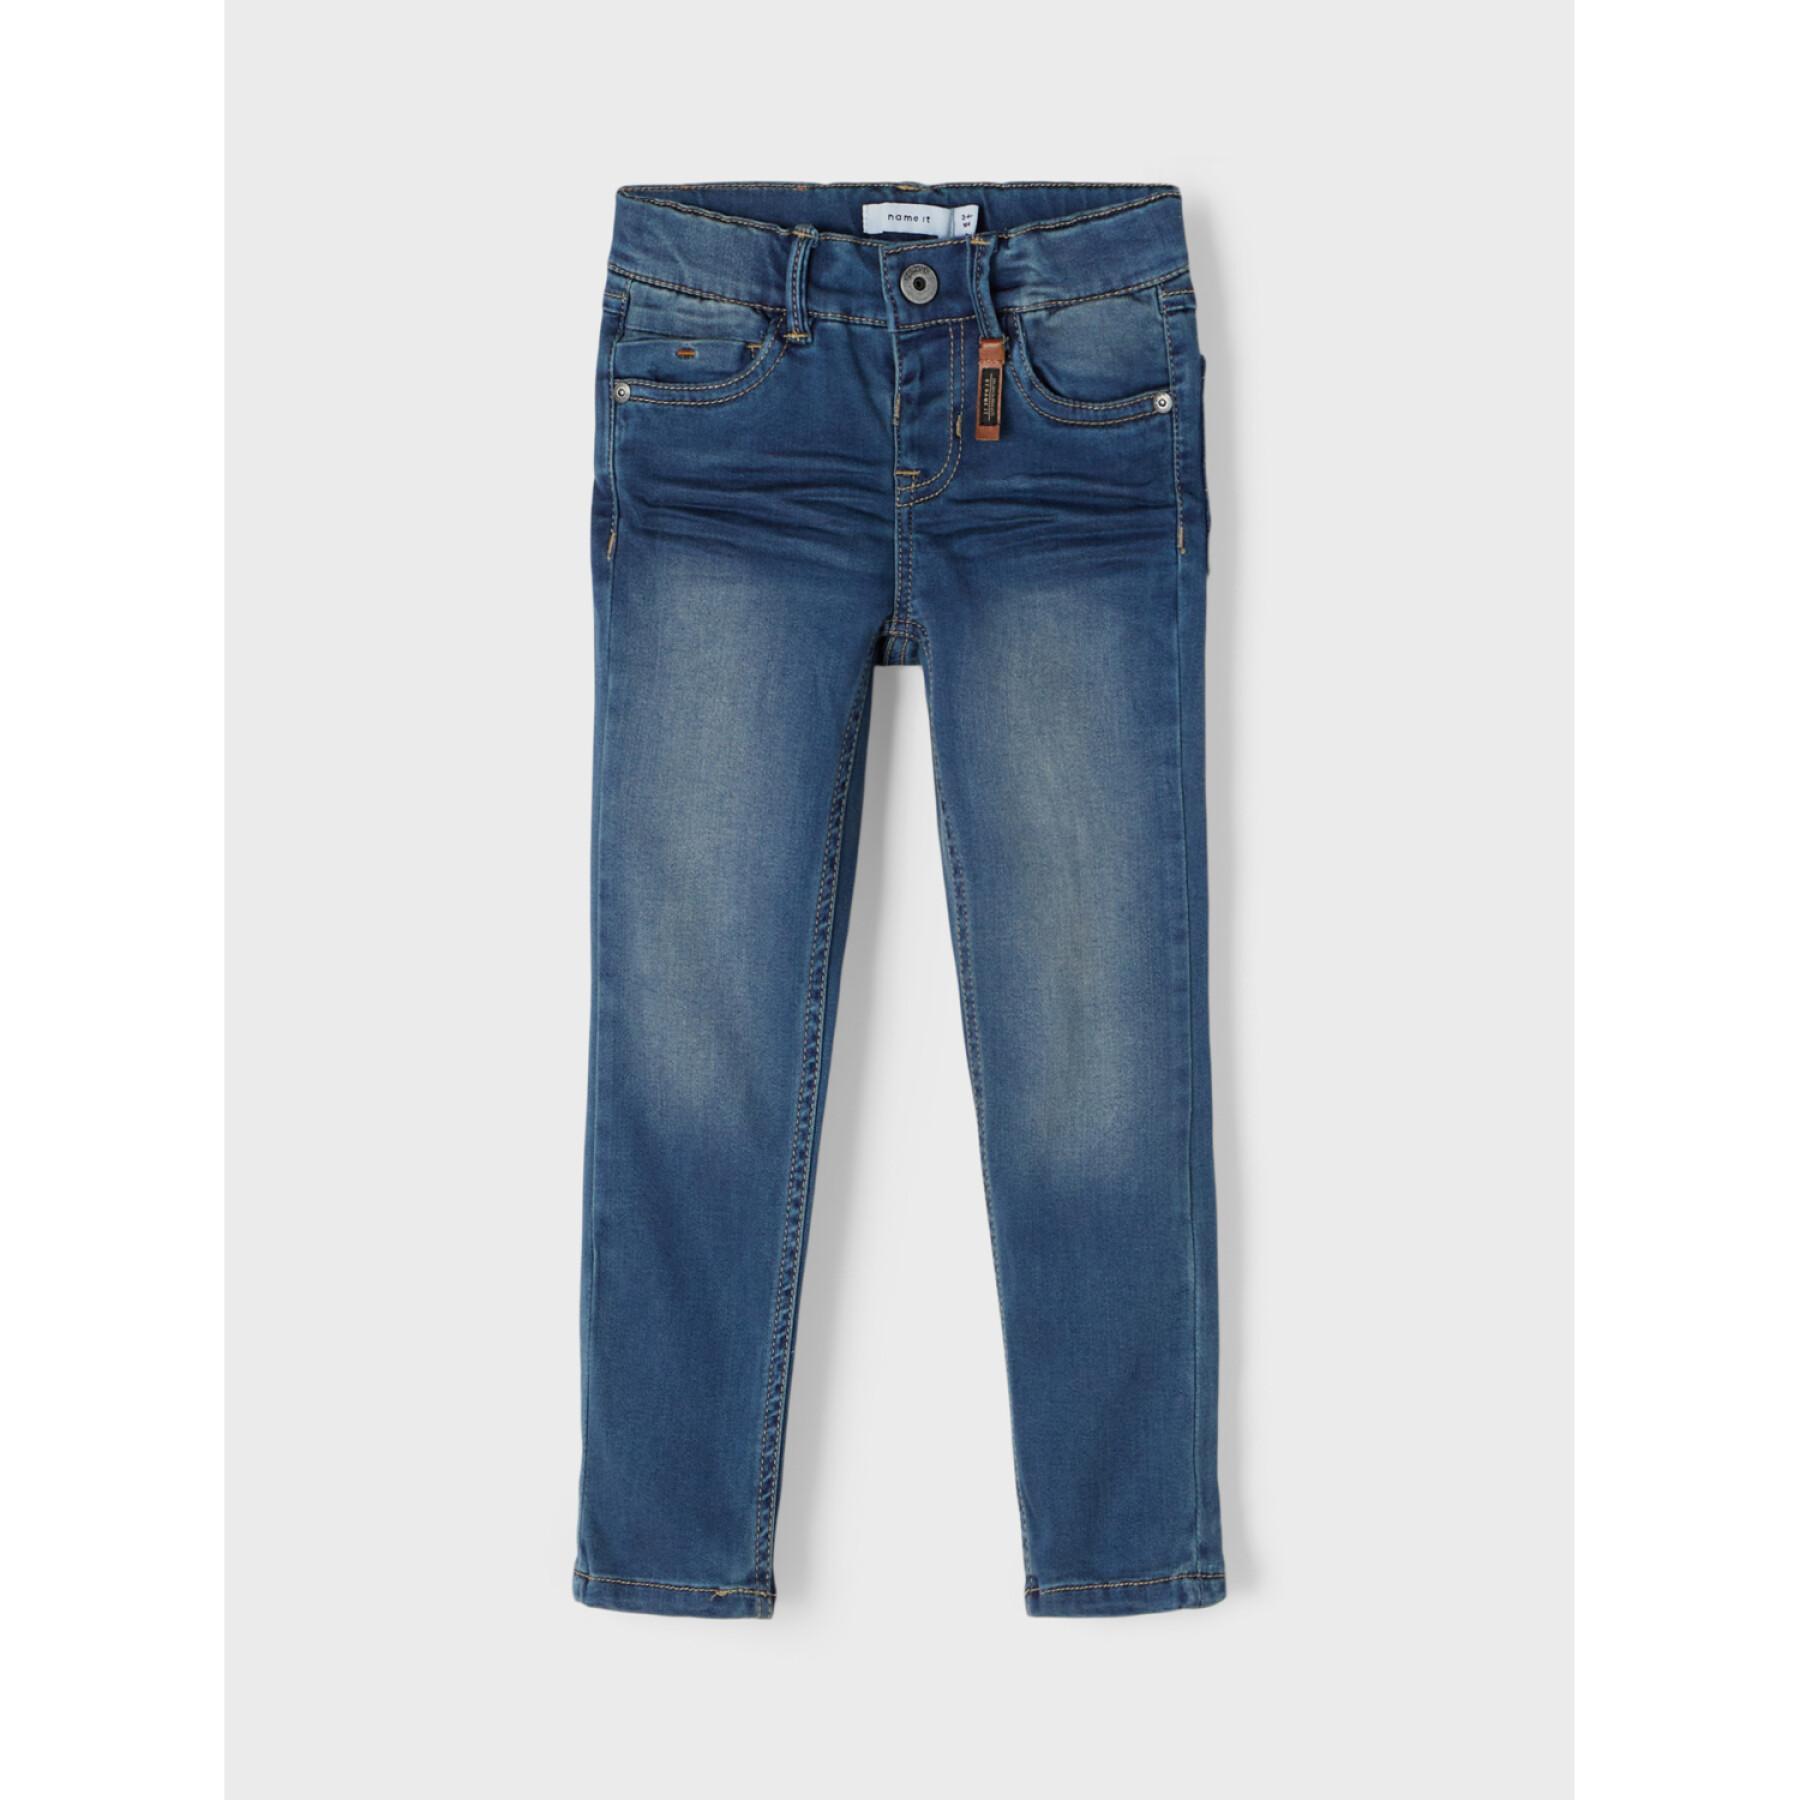 Baby jeans Name it Theo Toras 3527